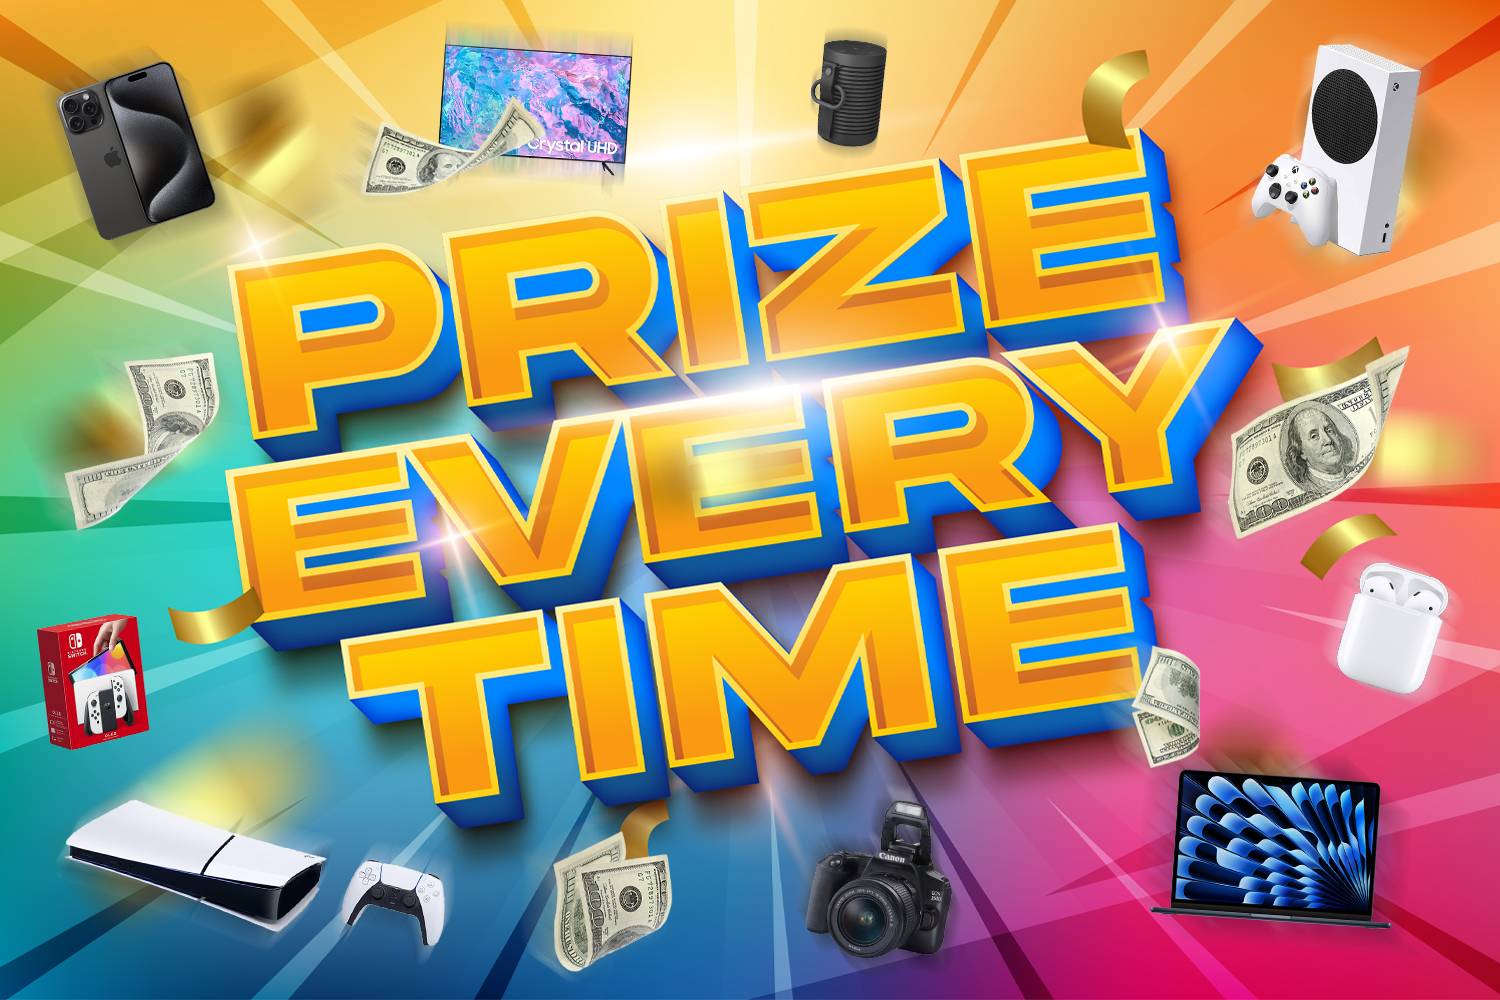 Win a Prize EVERY Time - Instant Win!